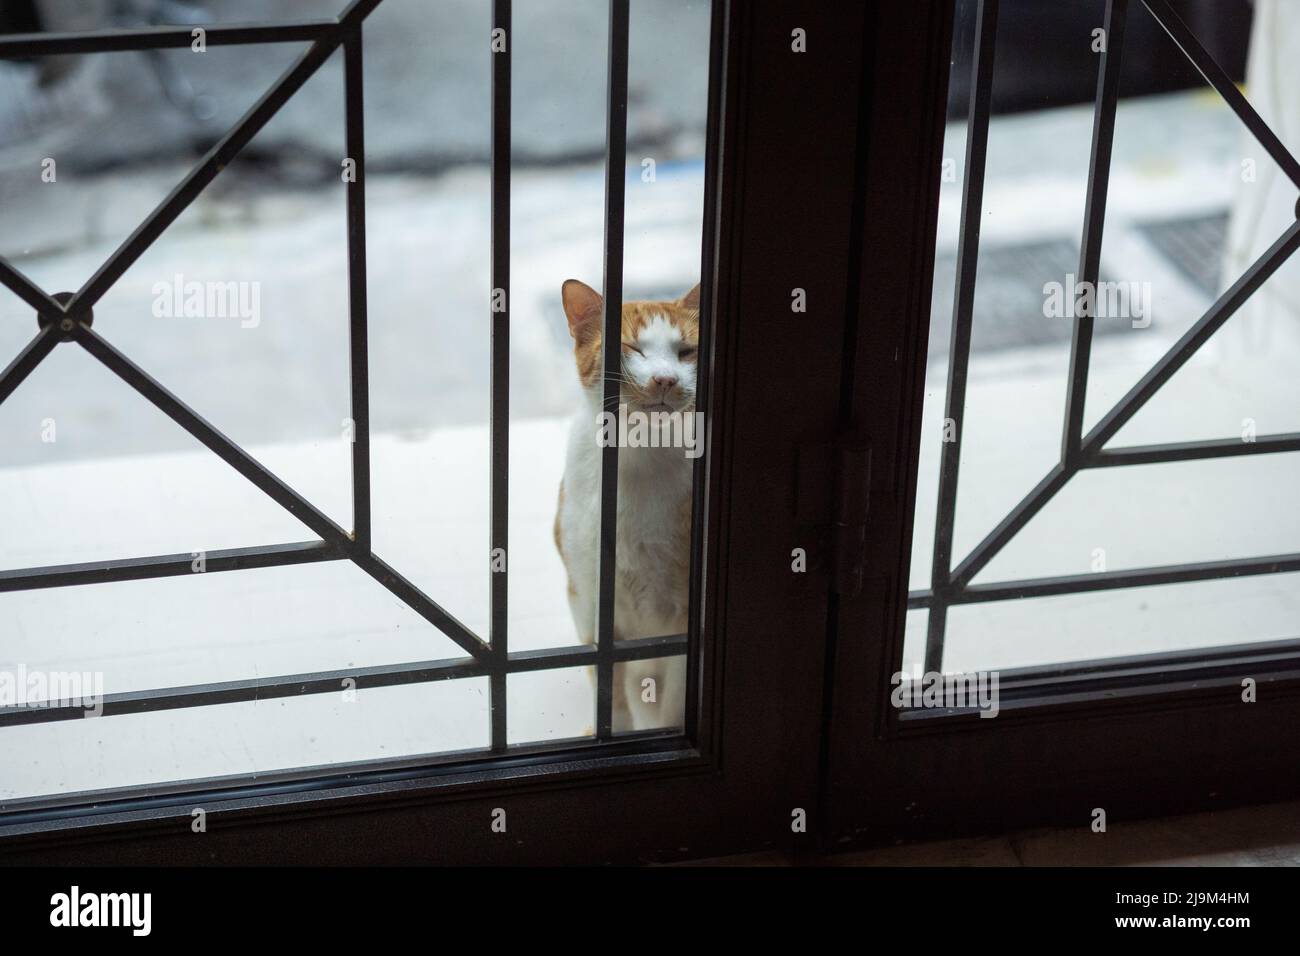 'Let me in' A cat pressing its face against the glass of a door wanting to come in. Stock Photo